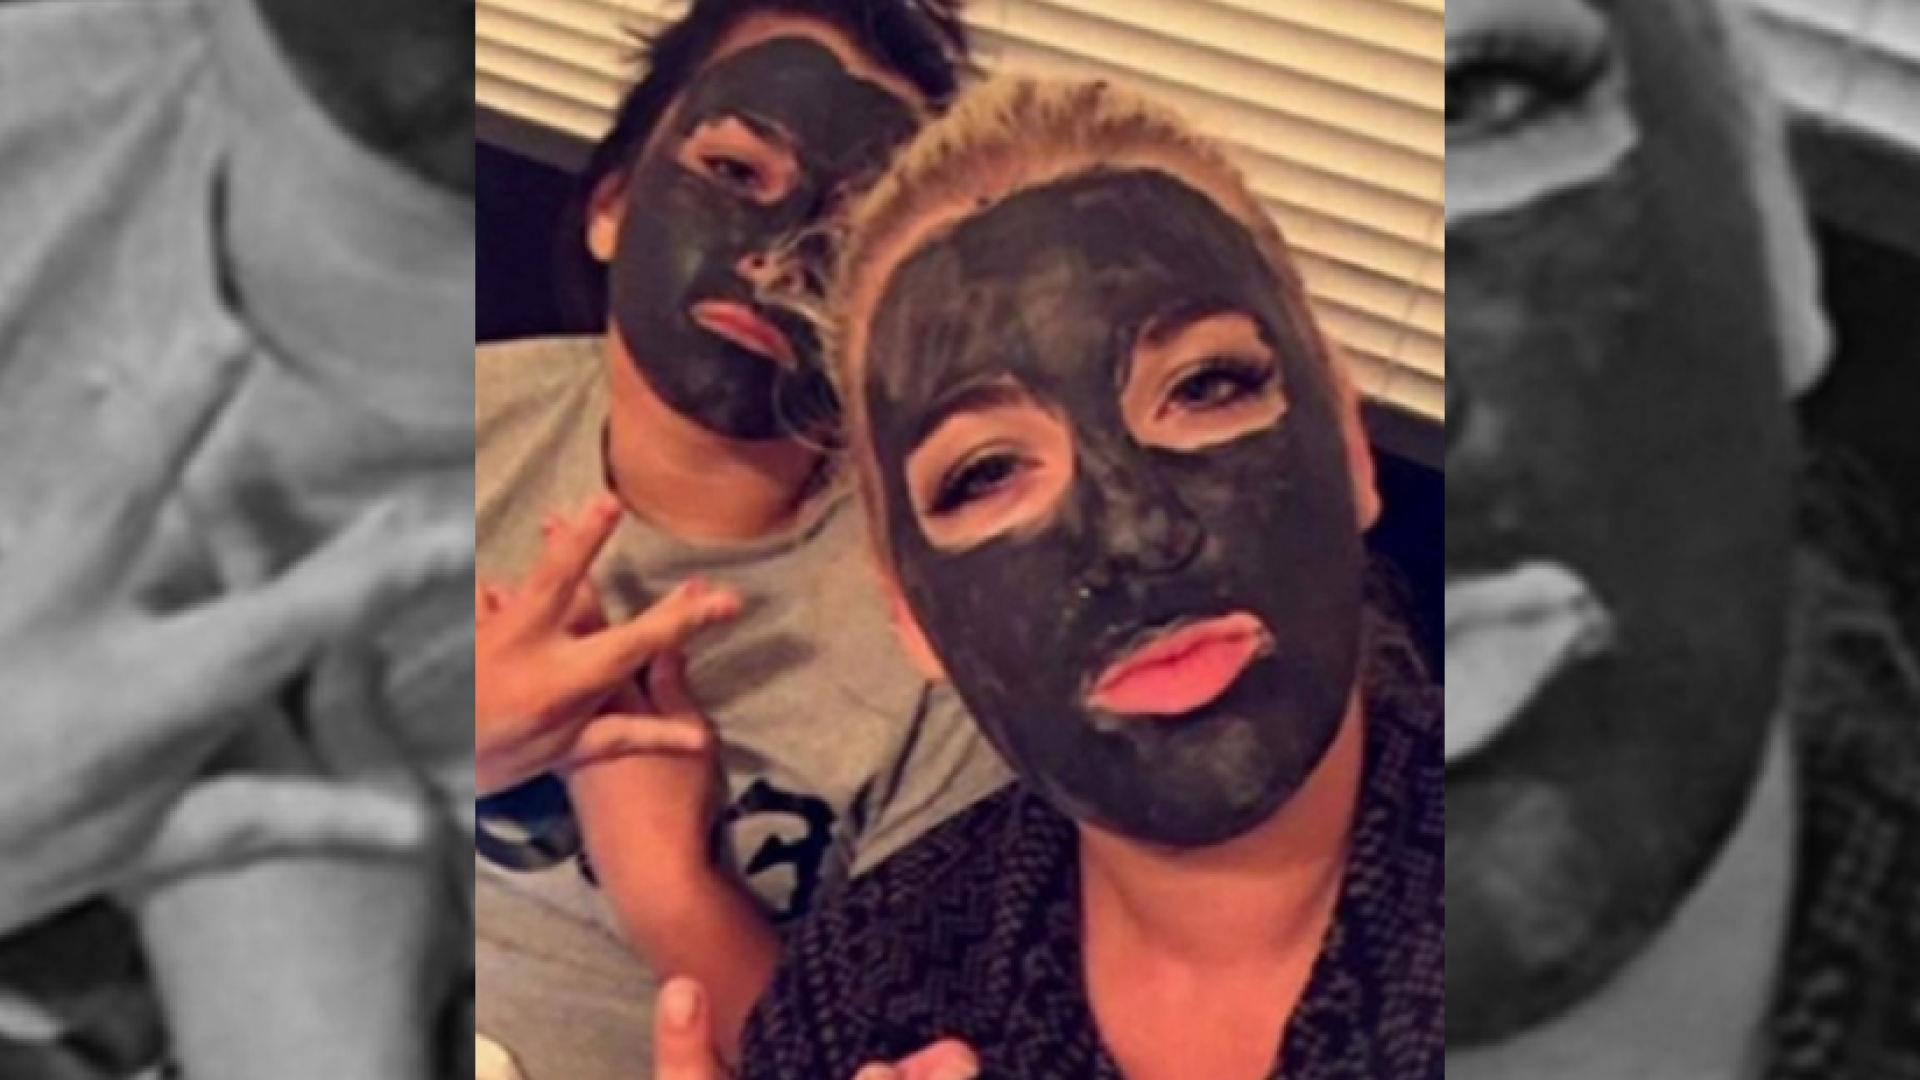 Racist Snapchat Photo Leads To Expulsion.